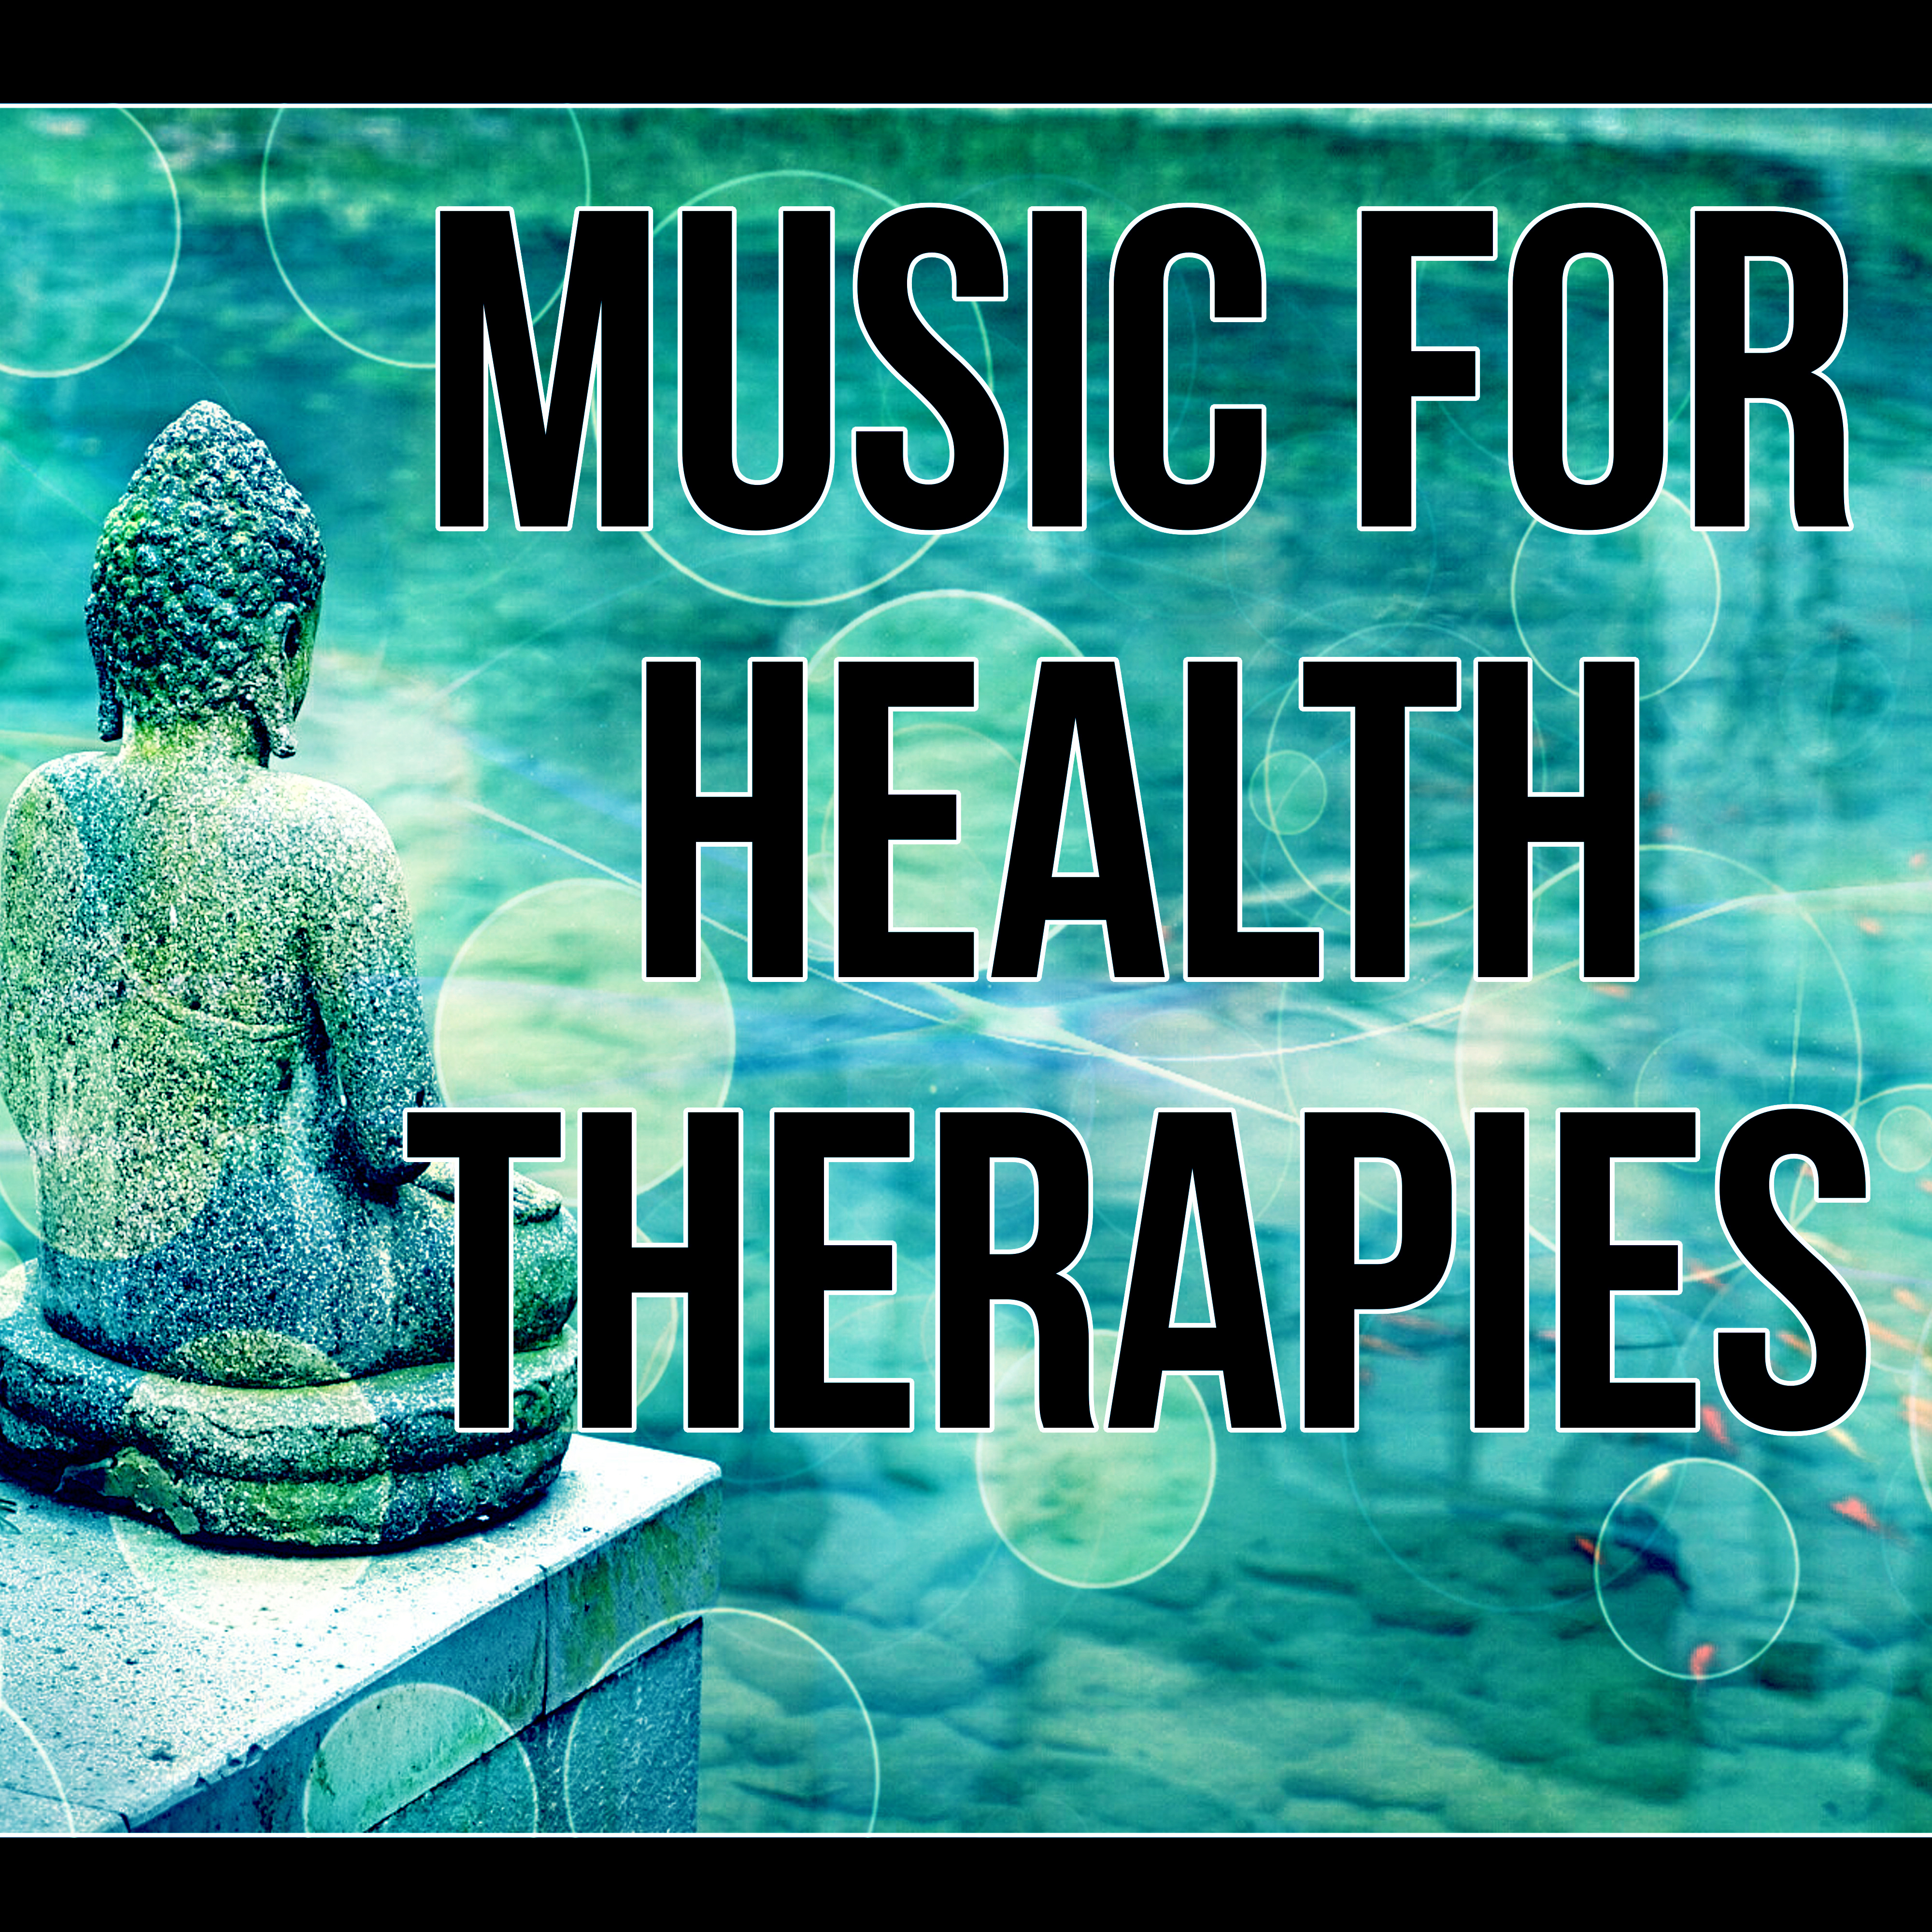 Music for Health Therapies - Sounds of Nature, Meditation & Relaxation Music, Ultimate Spa Music Collection